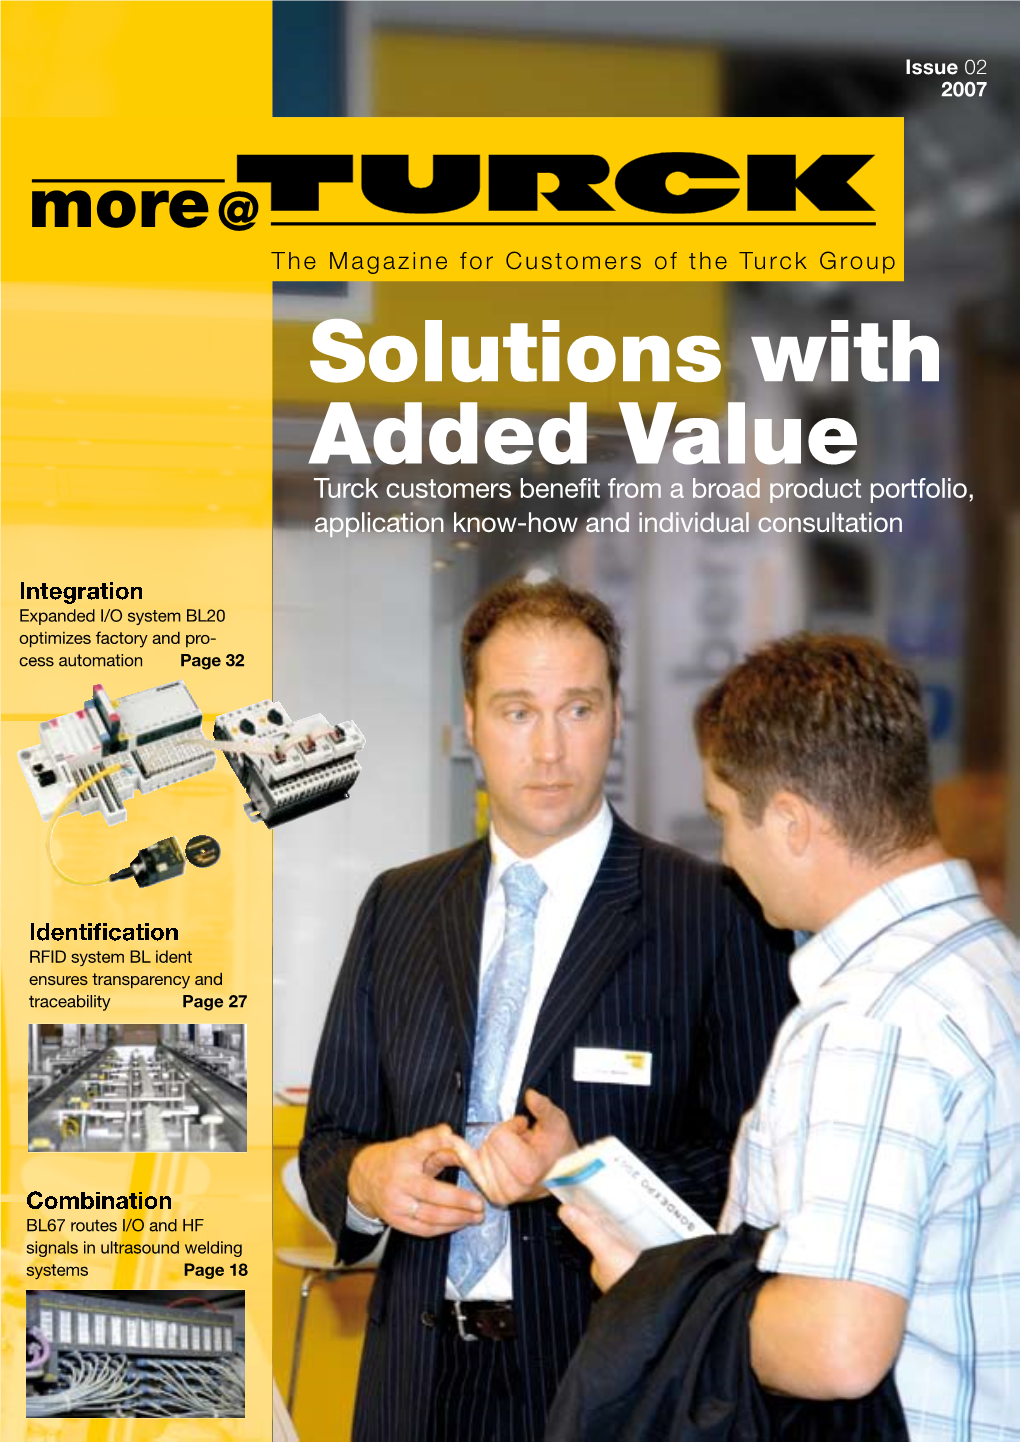 Solutions with Added Value Turck Customers Benefit from a Broad Product Portfolio, Application Know-How and Individual Consultation